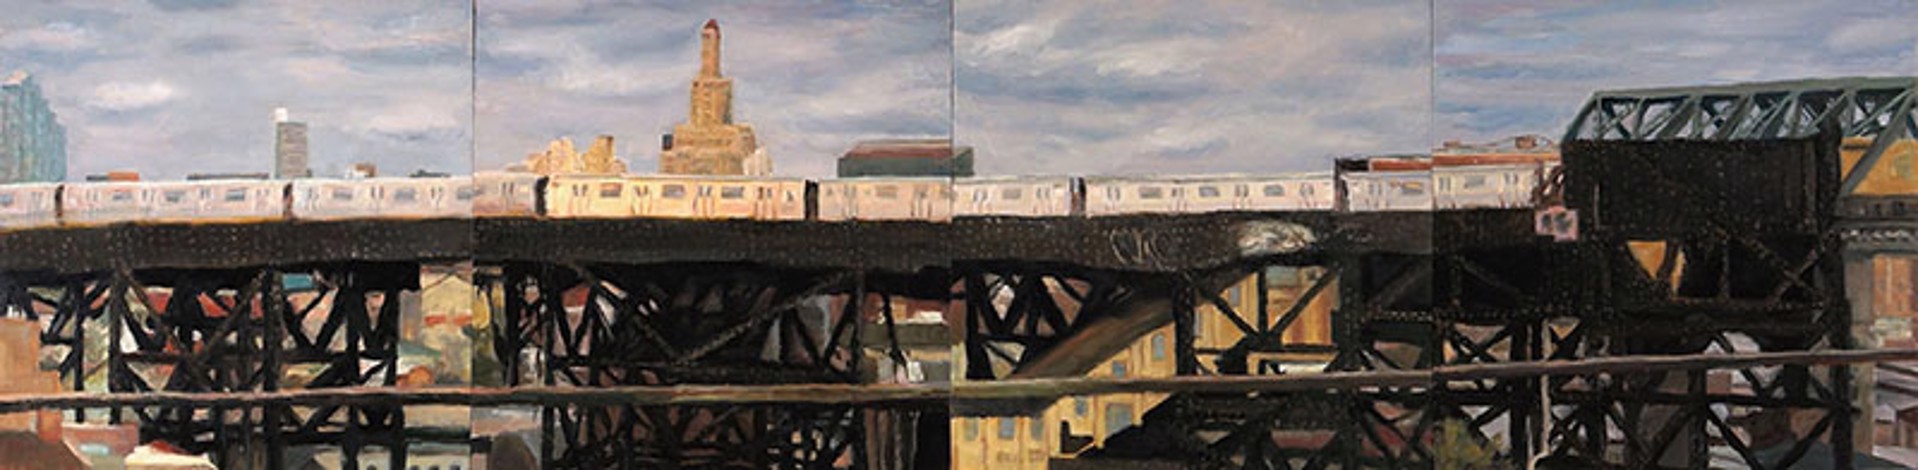 Over Gowanus by Patty Neal